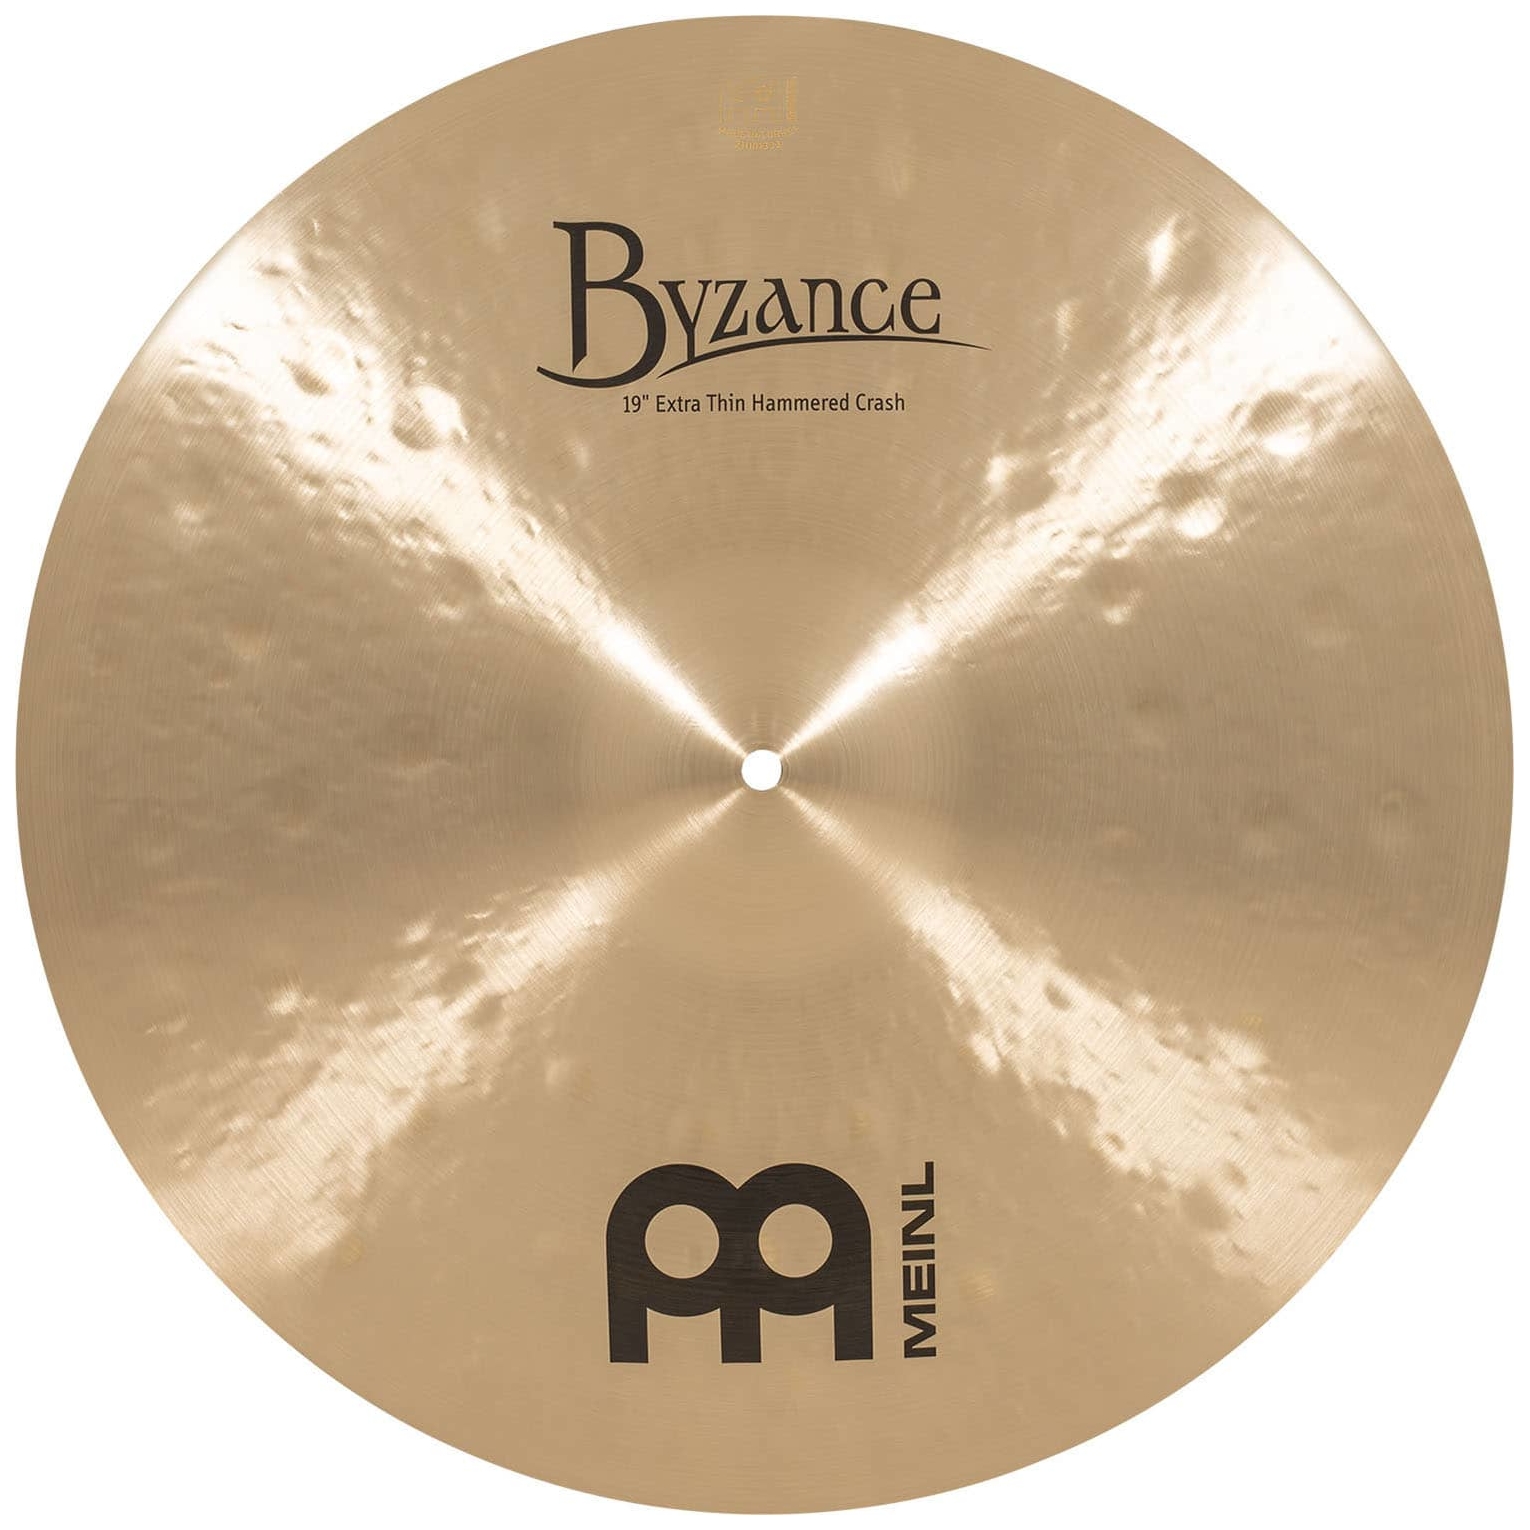 Meinl Cymbals B19ETHC - 19" Byzance Traditional Extra Thin Hammered Crash 